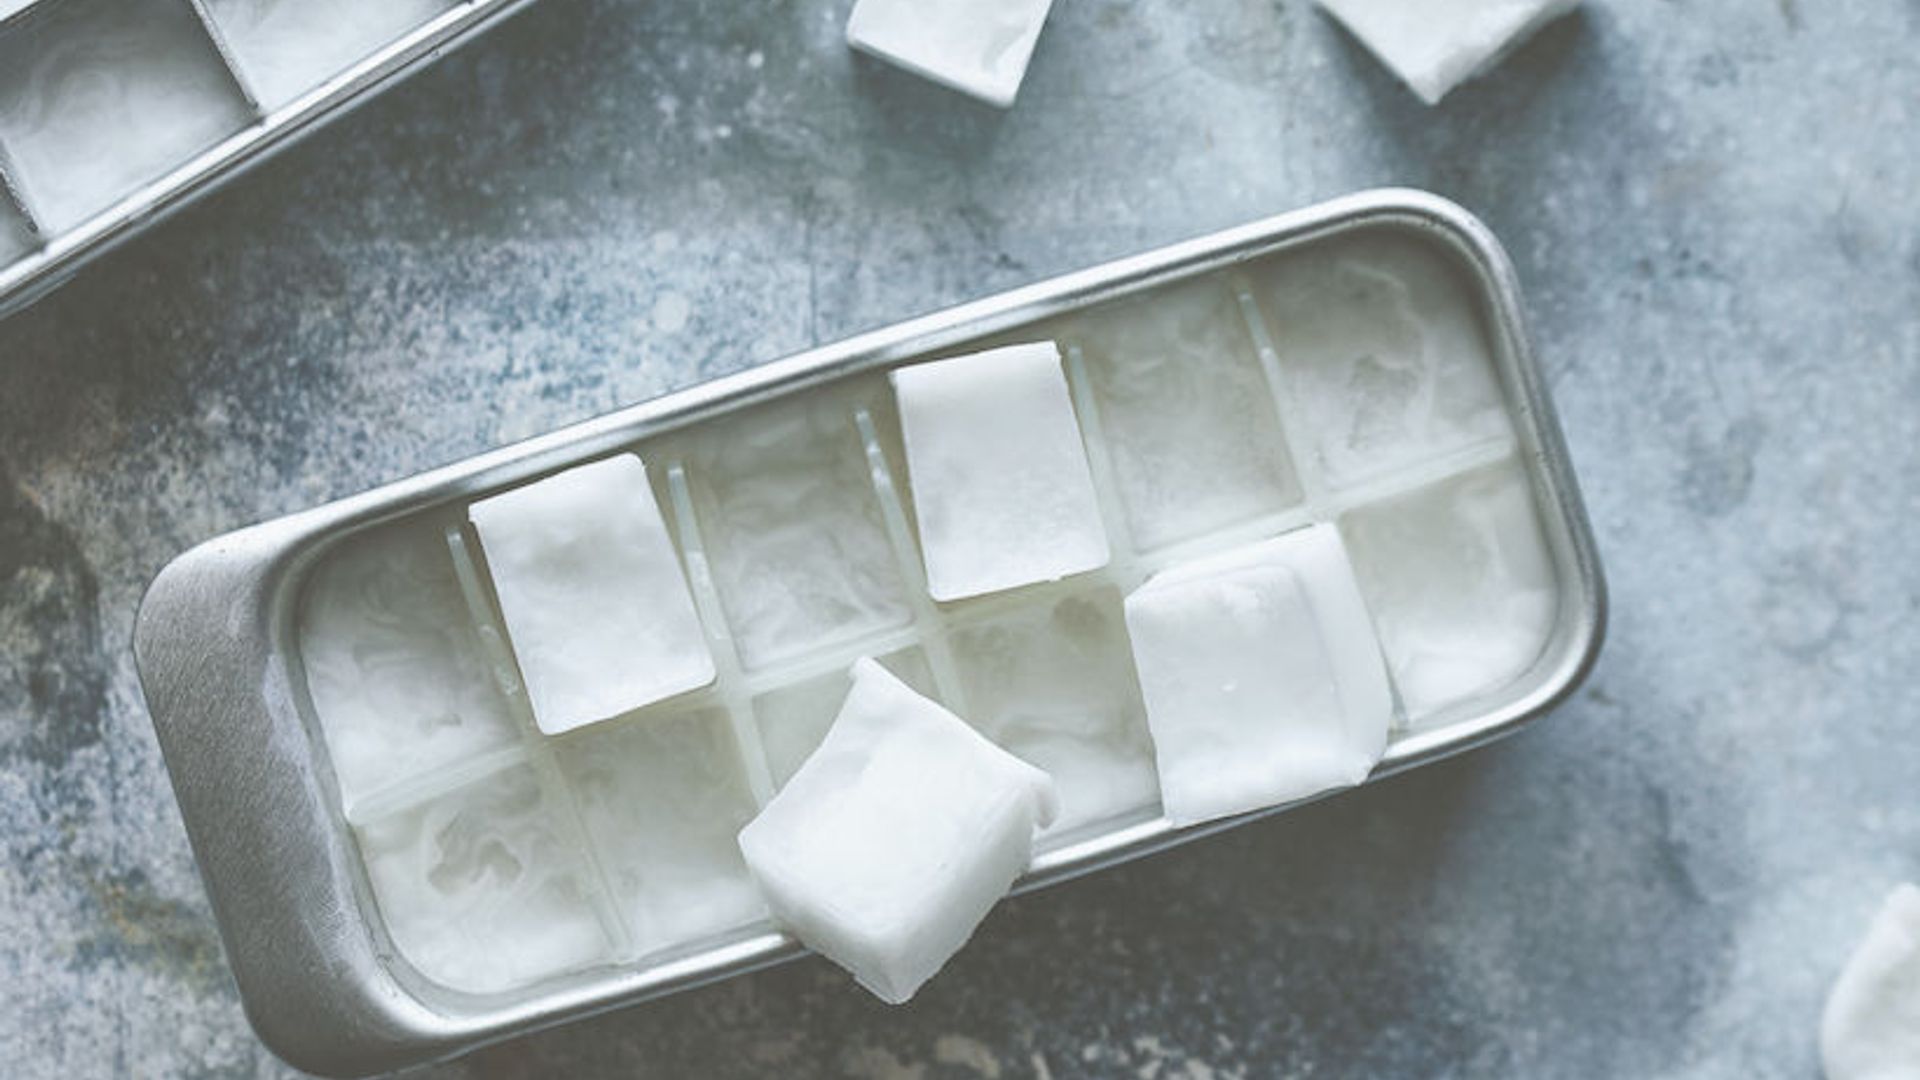 These DIY oil pulling ice cubes could give you Gwyneth Paltrow-style white teeth